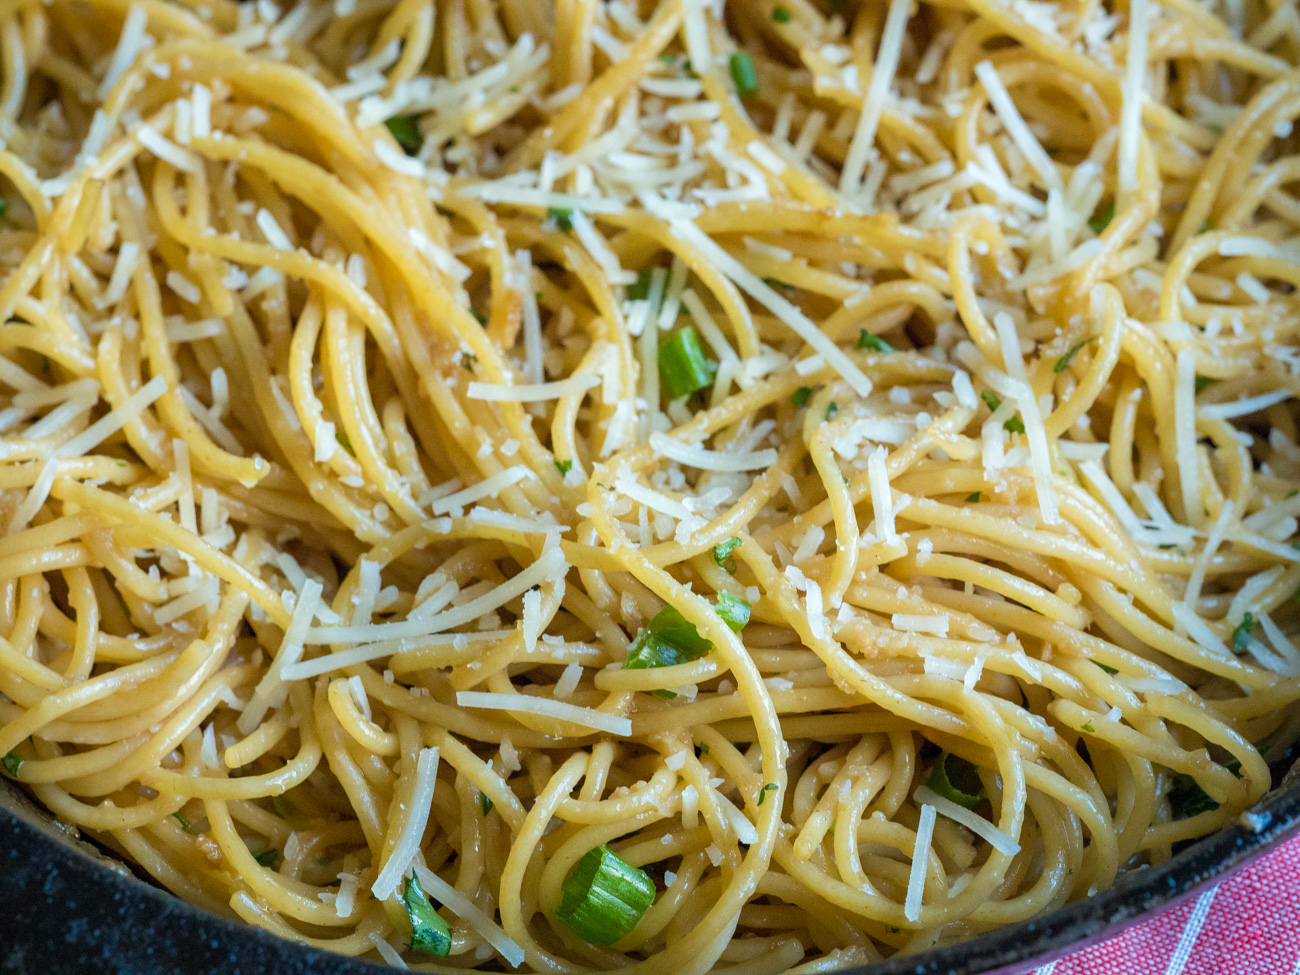 10-Minute Garlic Noodles with Incredible Flavor: Why I Made Them Twice in One Week